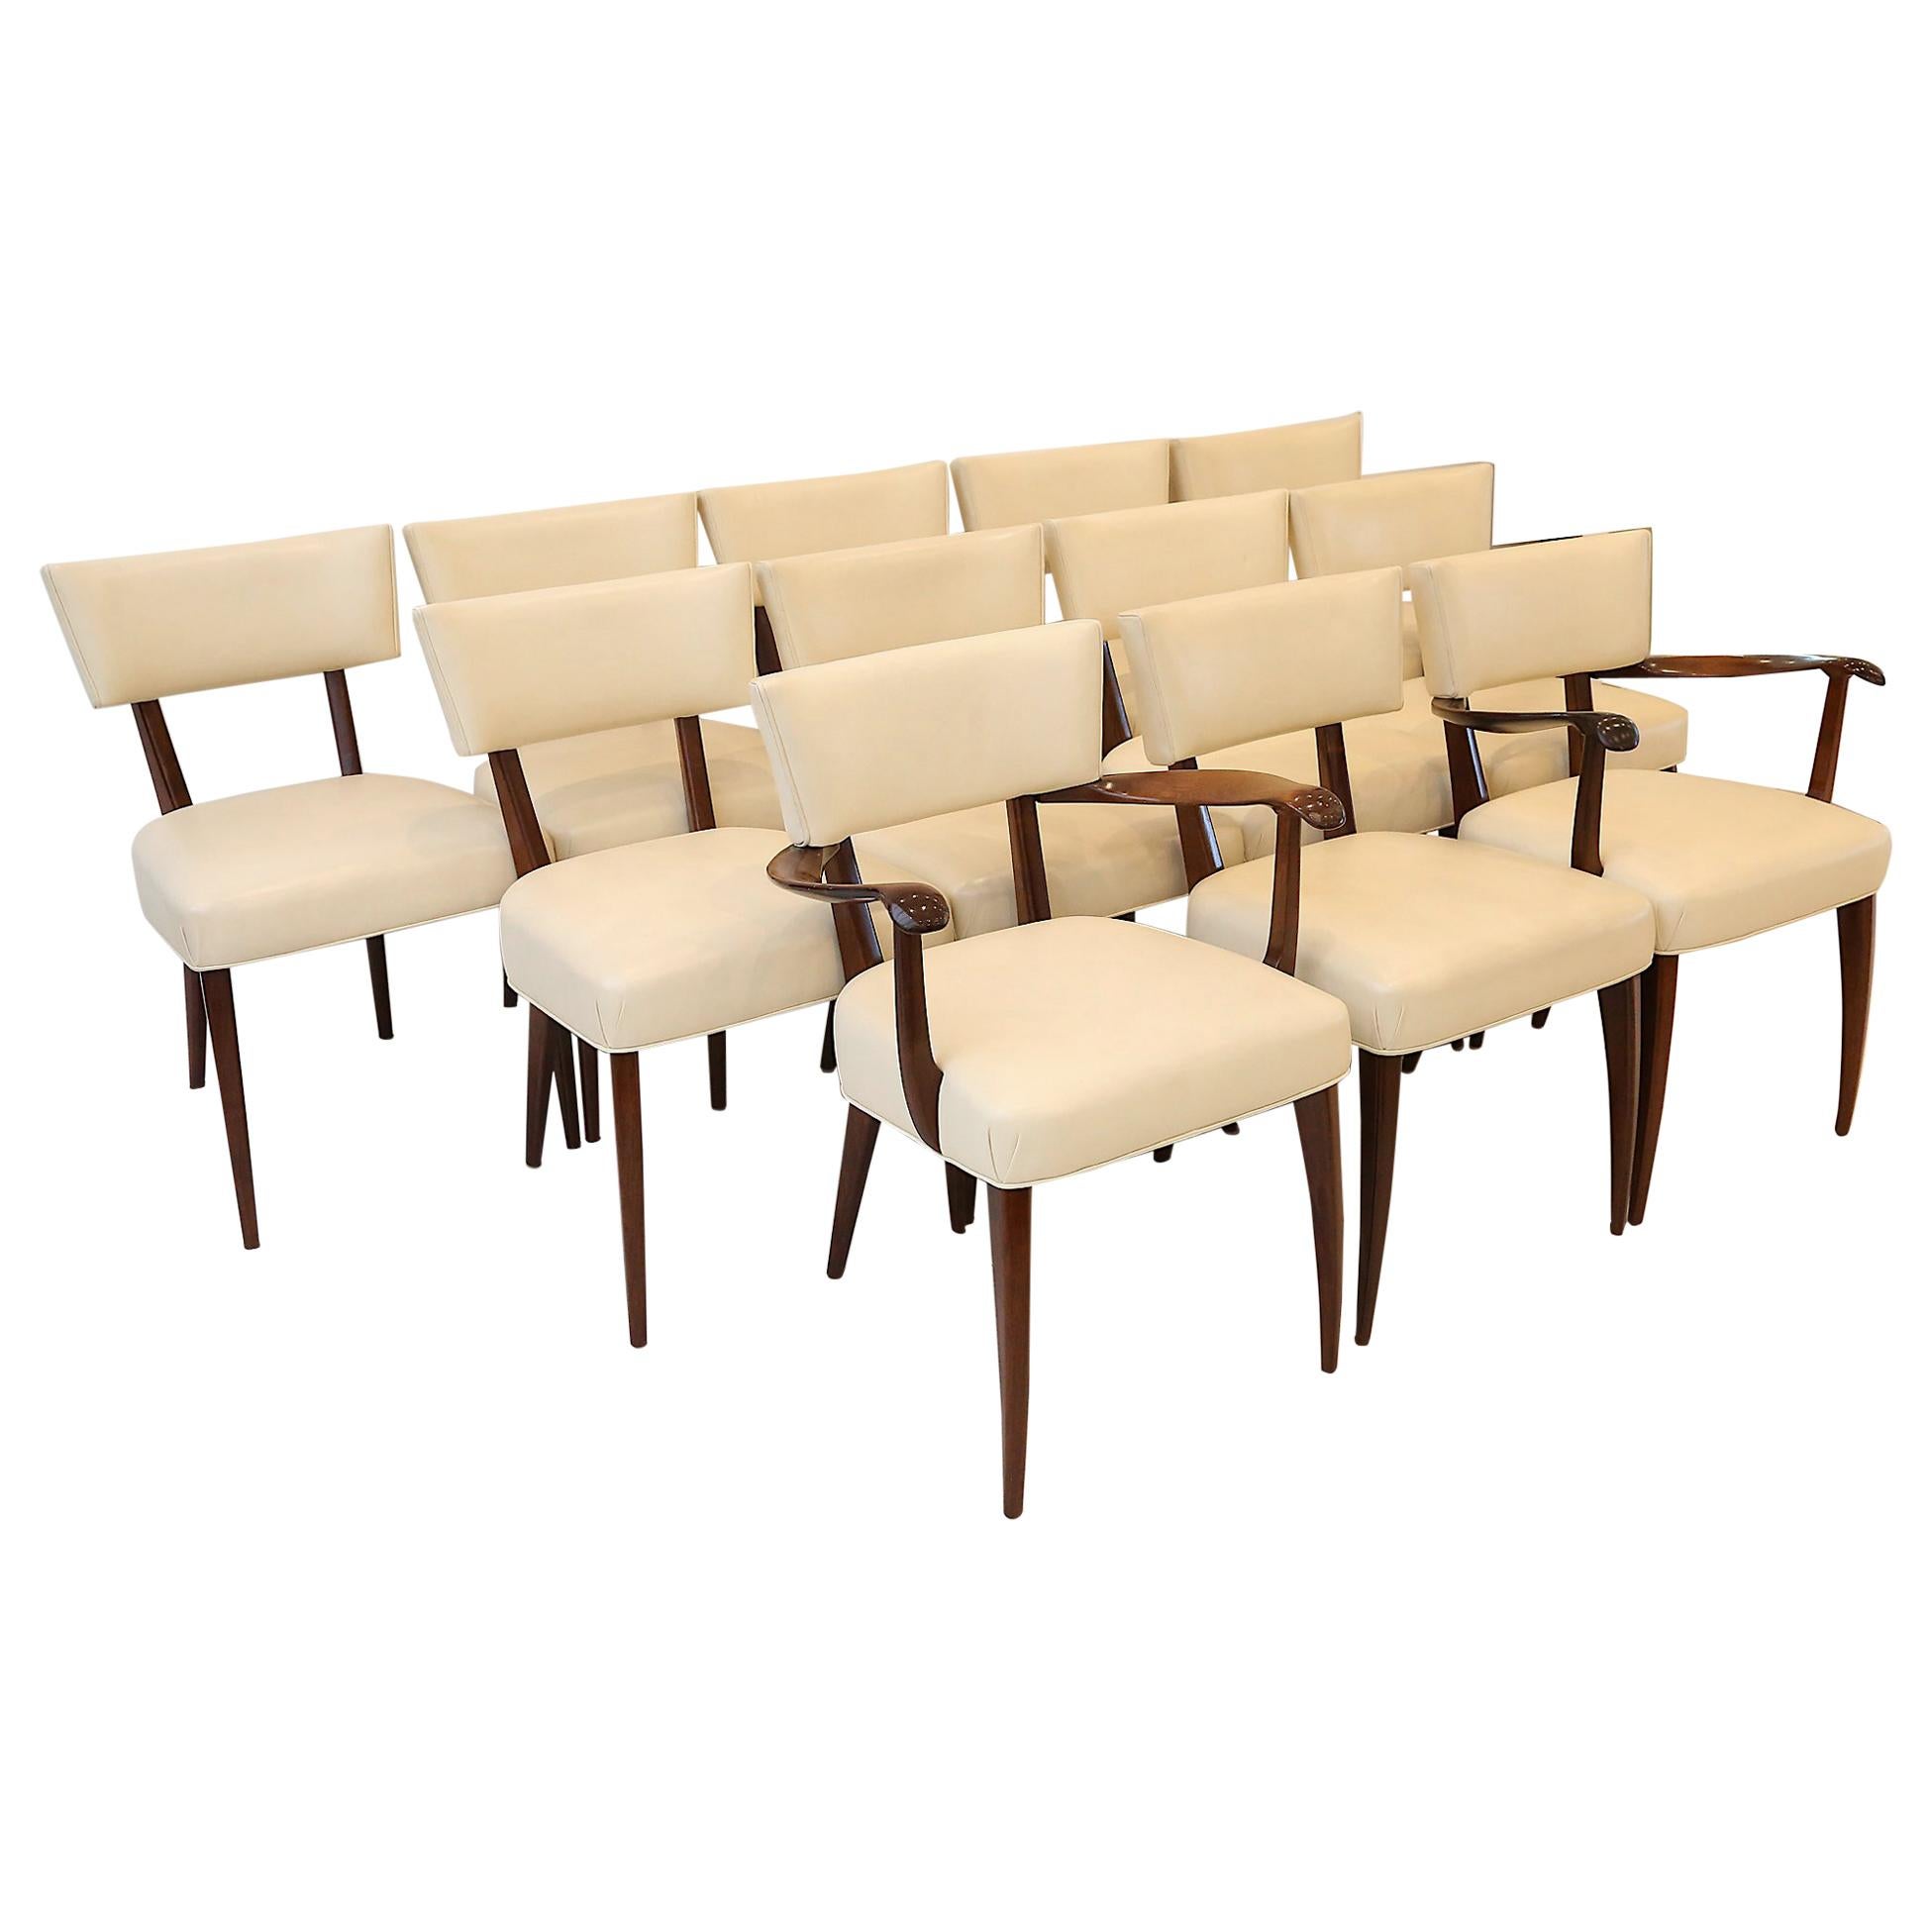 Attrib. Paolo Buffa Dining Chairs Mahogany and Leather, Midcentury, 1940s